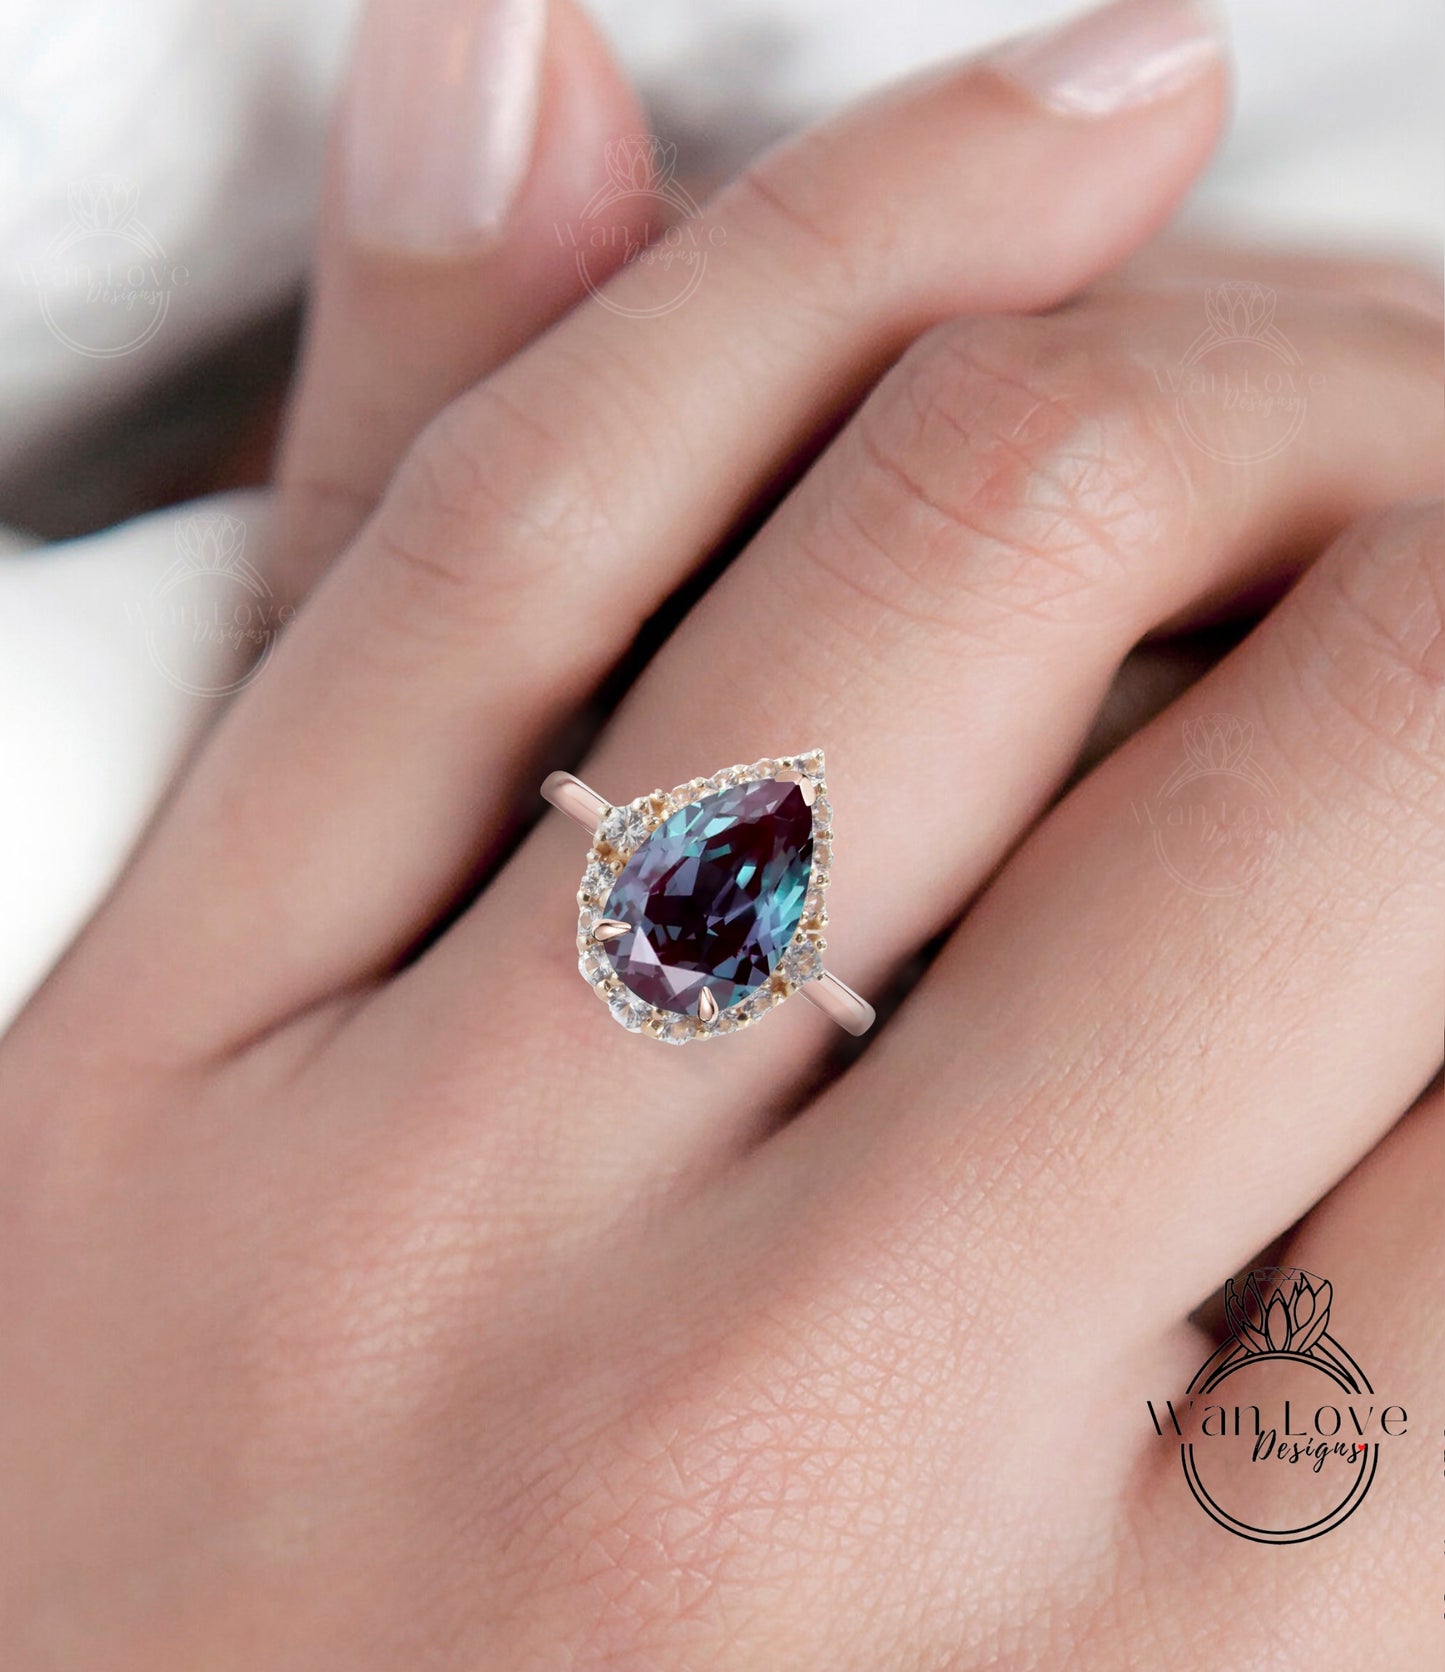 Alexandrite engagement ring Vintage diamond halo ring pear rose gold ring wedding antique moissanite graduated halo promise ring Anniversary